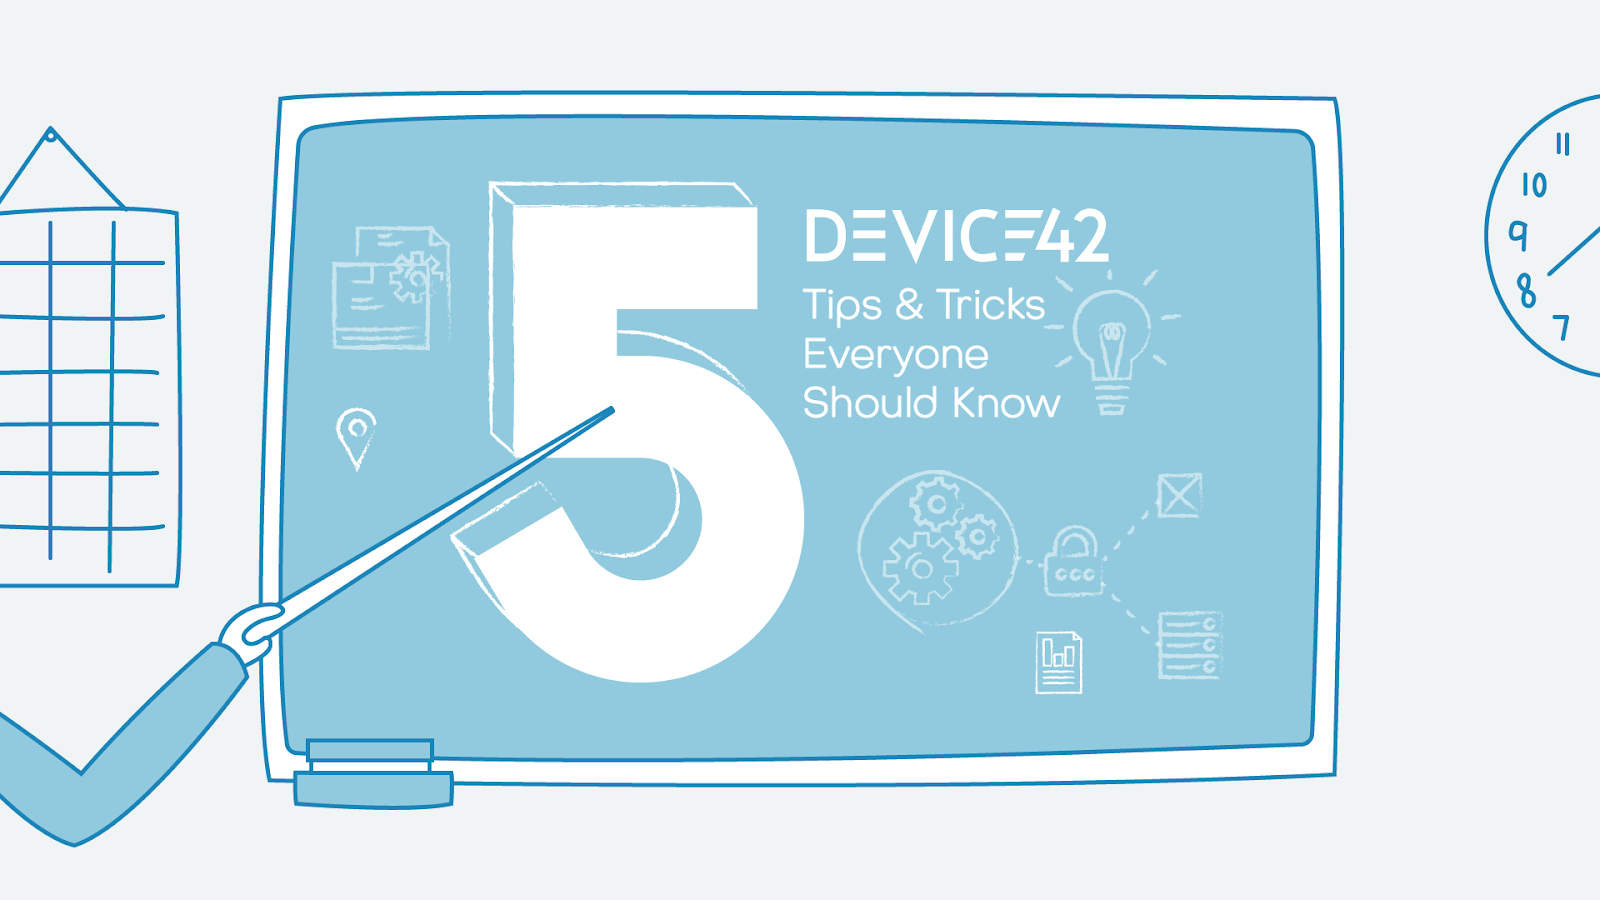 5 Device42 Tips and Tricks